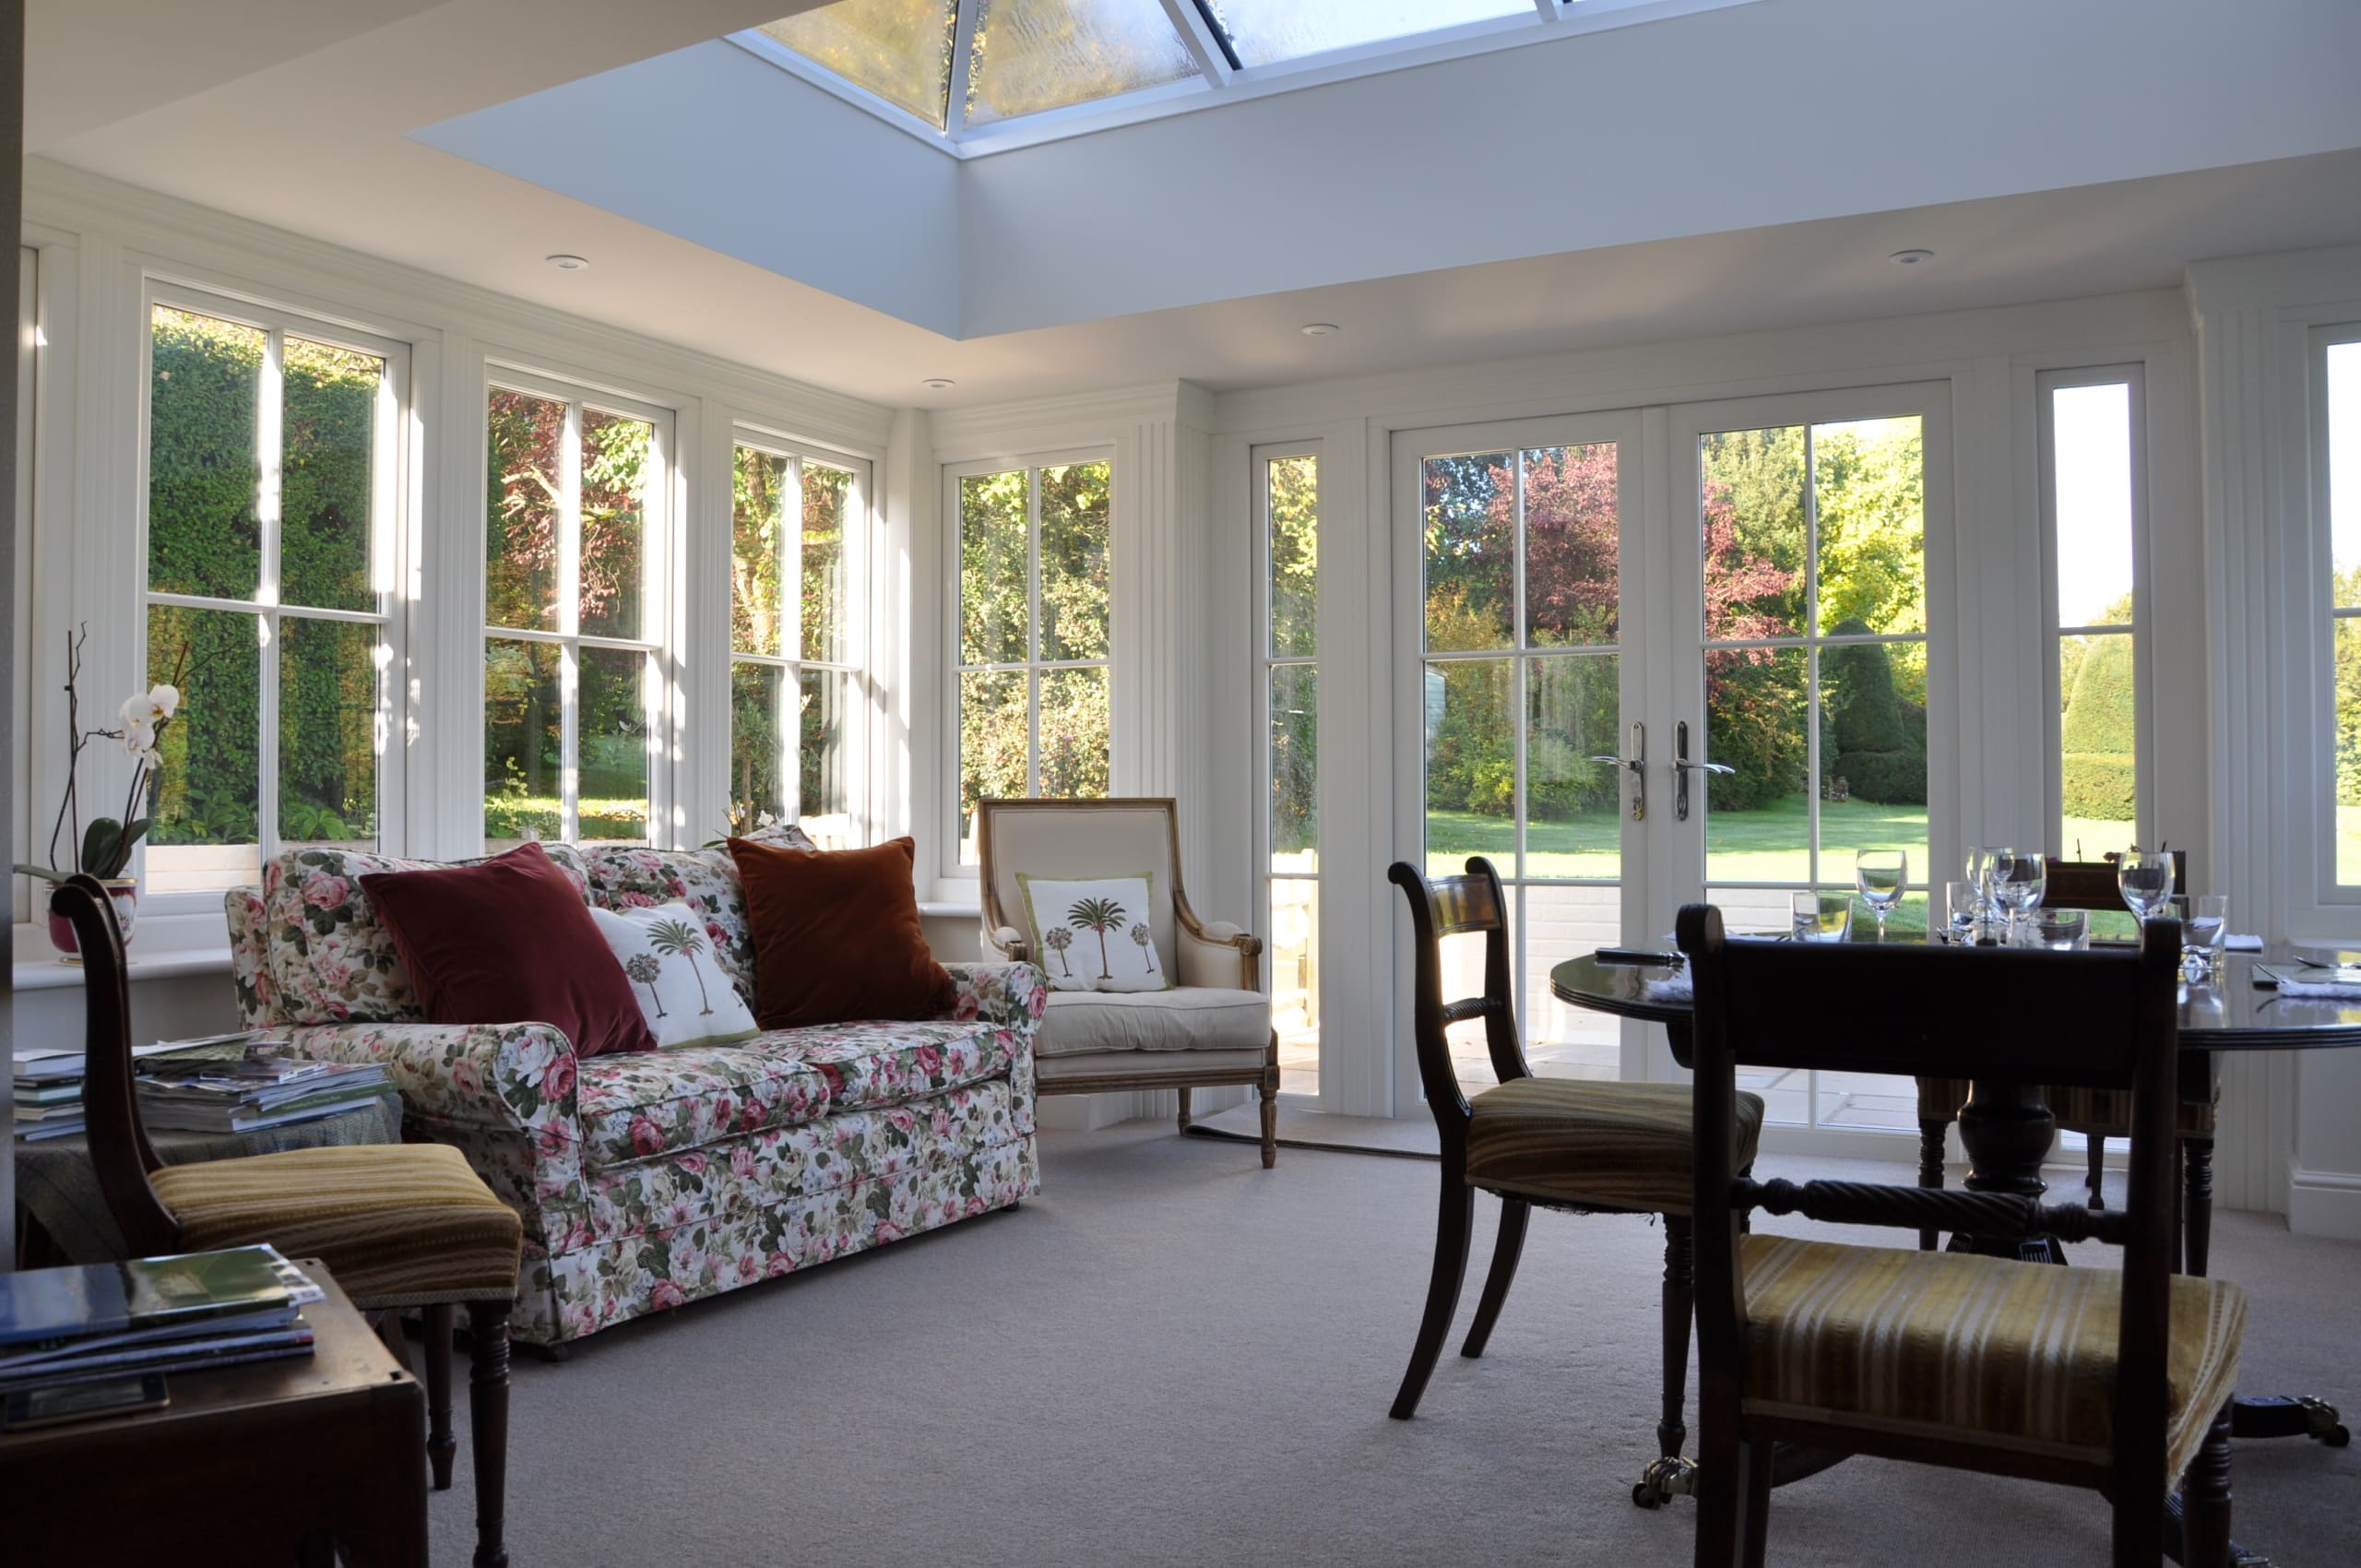 Interior of a living room diner with patio doors to garden and roof lantern.